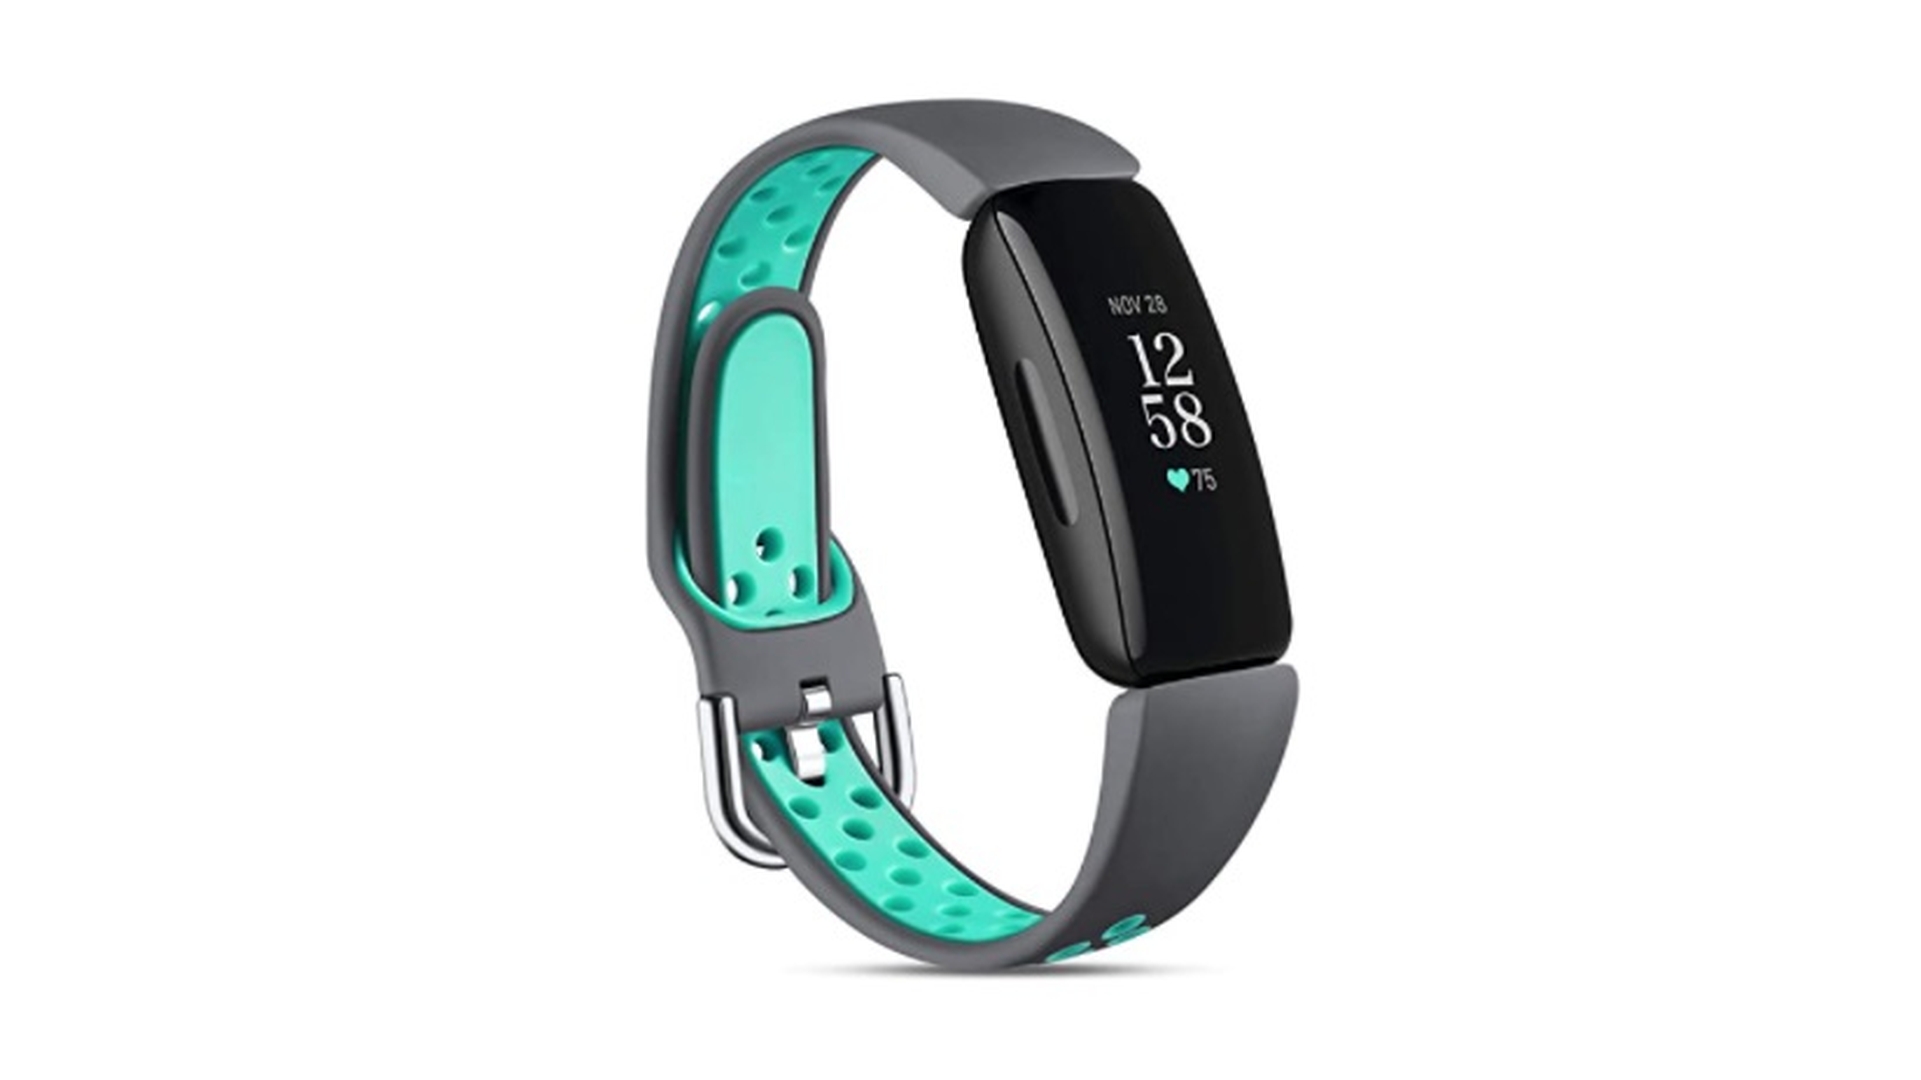 Maledan Sport Band Inspire 2 in grey and blue